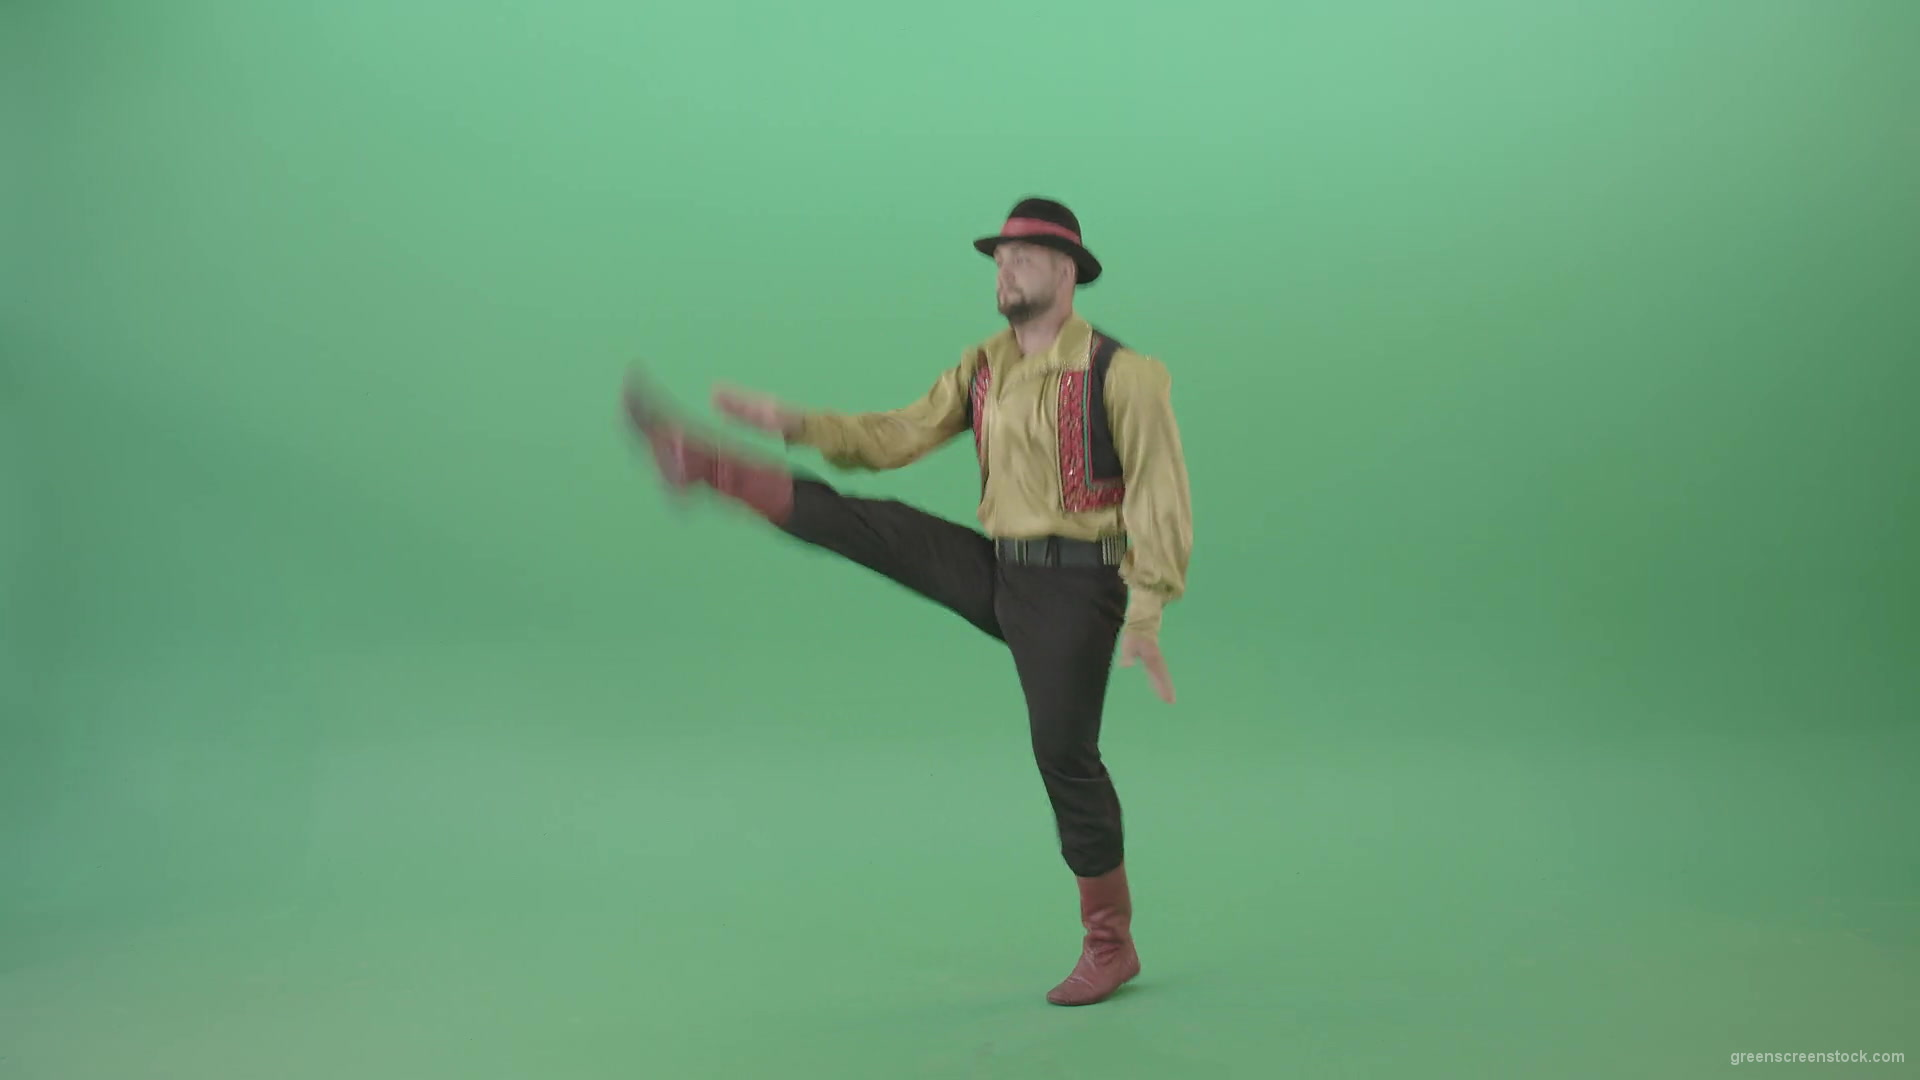 Balcan-gipsy-man-dancer-showing-clapping-moves-isolated-on-green-screen-4K-Video-Footage-1920_008 Green Screen Stock